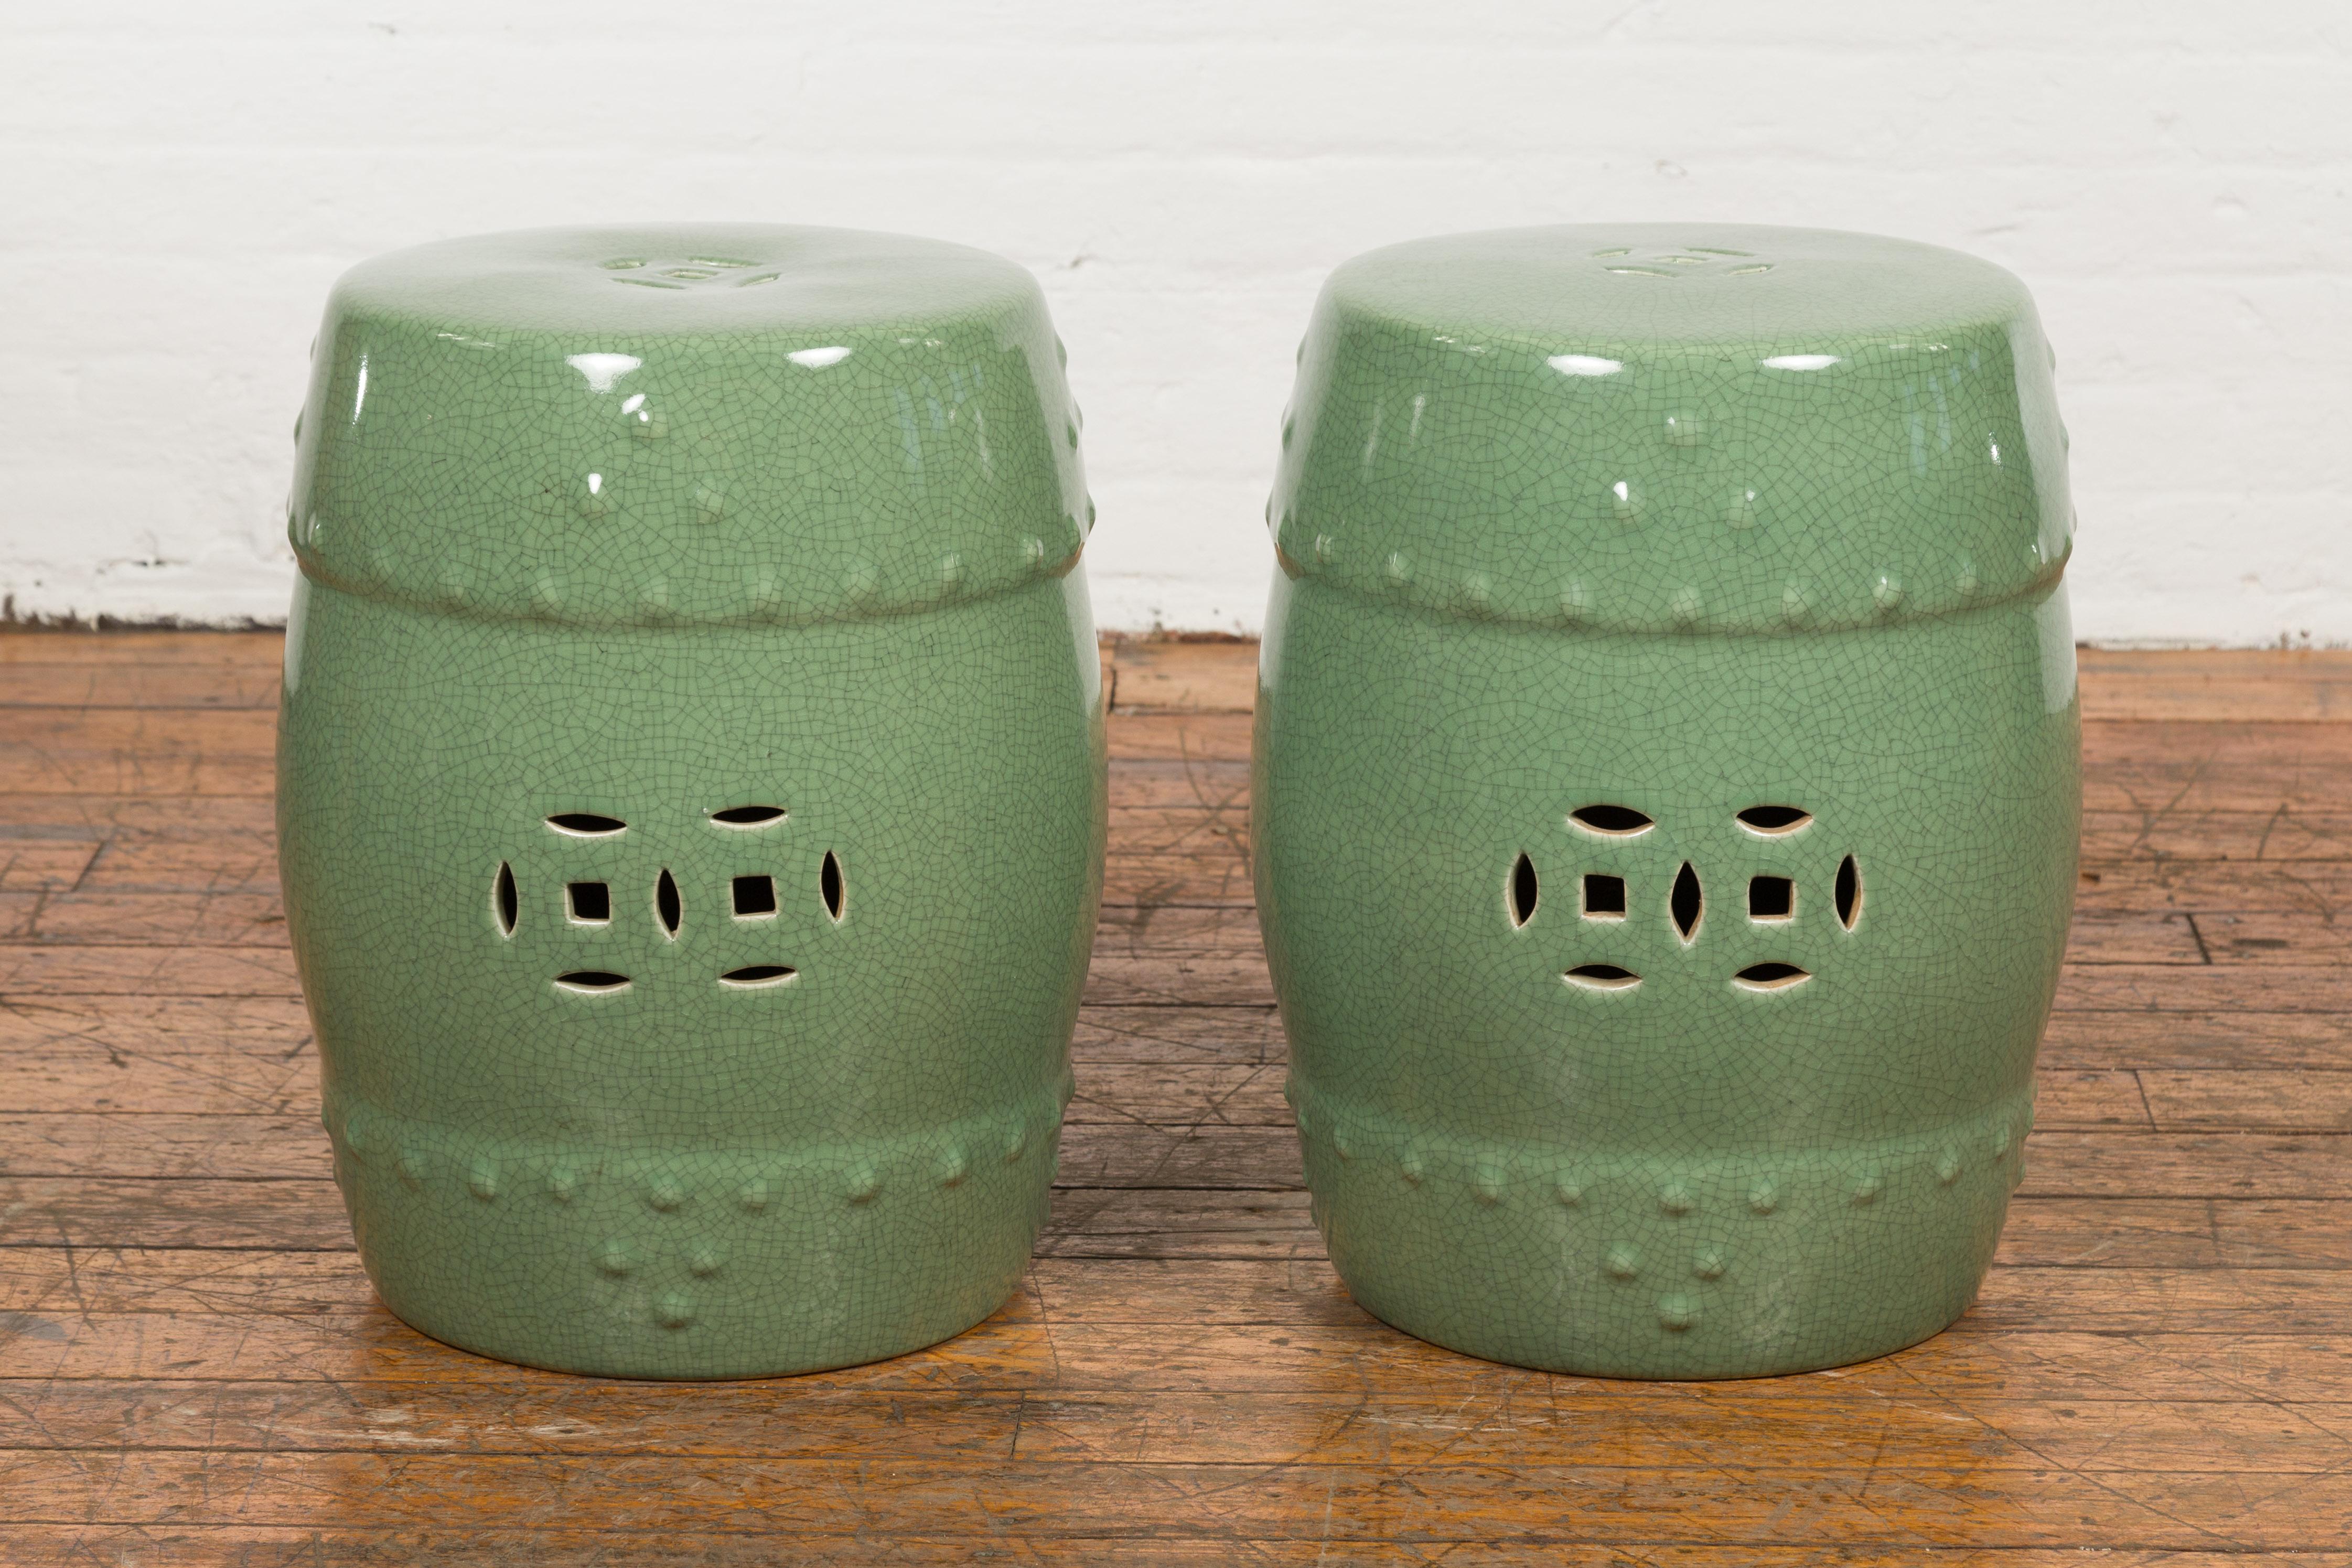 Chinese vintage celadon glazed ceramic garden stool from the Mid-20th Century, with pierced and raised motifs, priced and sold each. Created in China during the mid century period, these elegant garden stools charm us with their celadon glazed